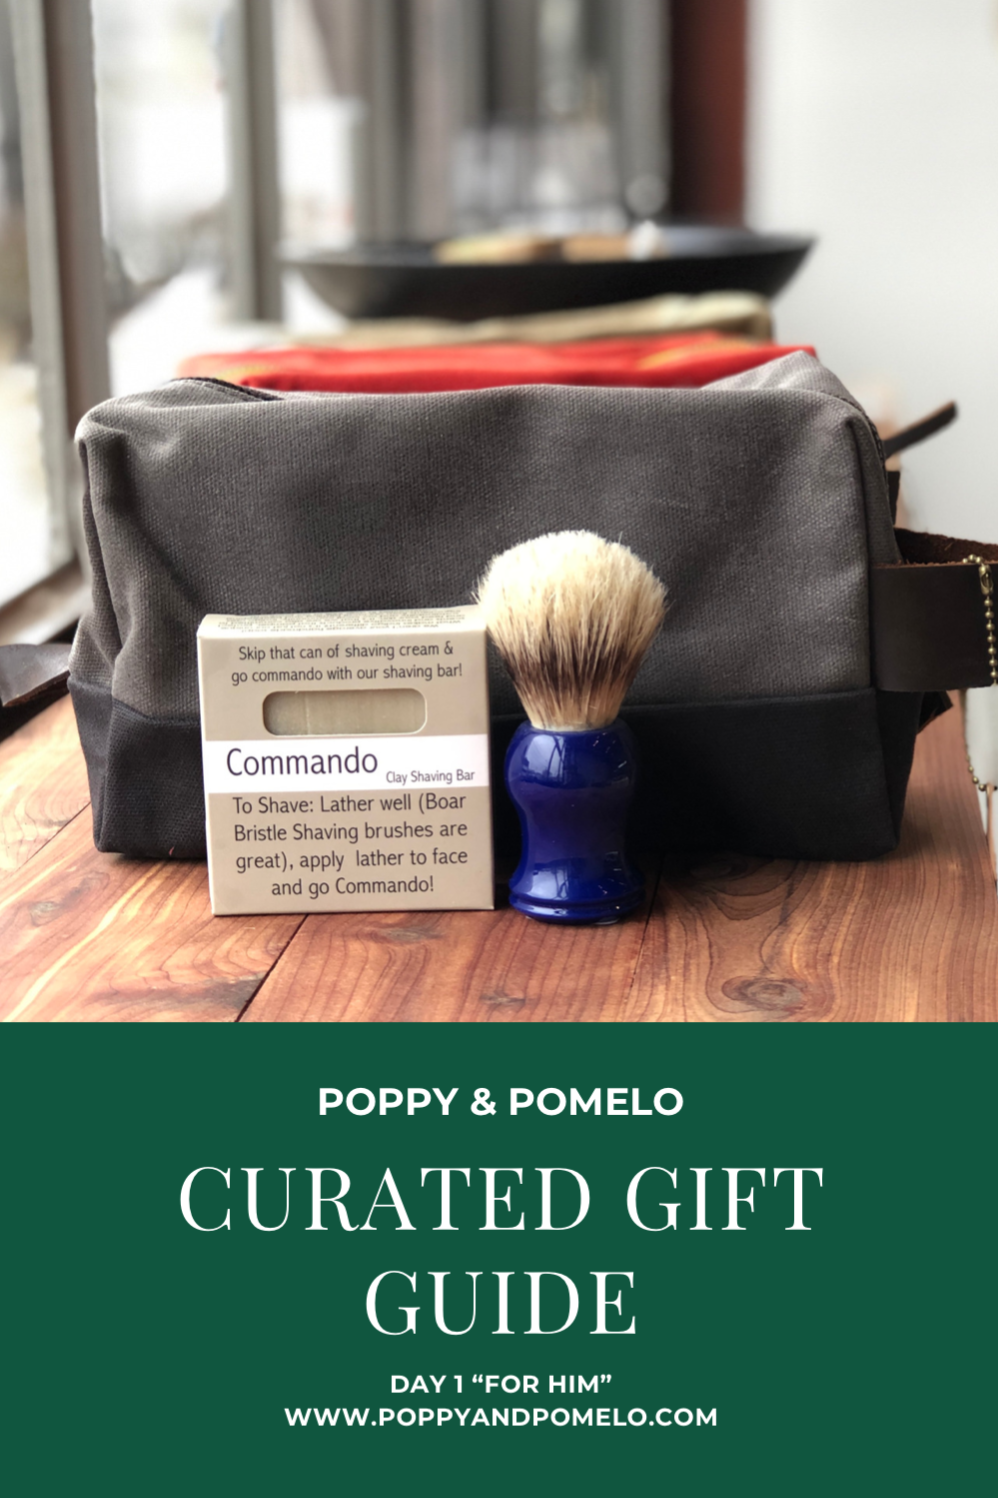 Curated Holiday Gift Guide “For Him”